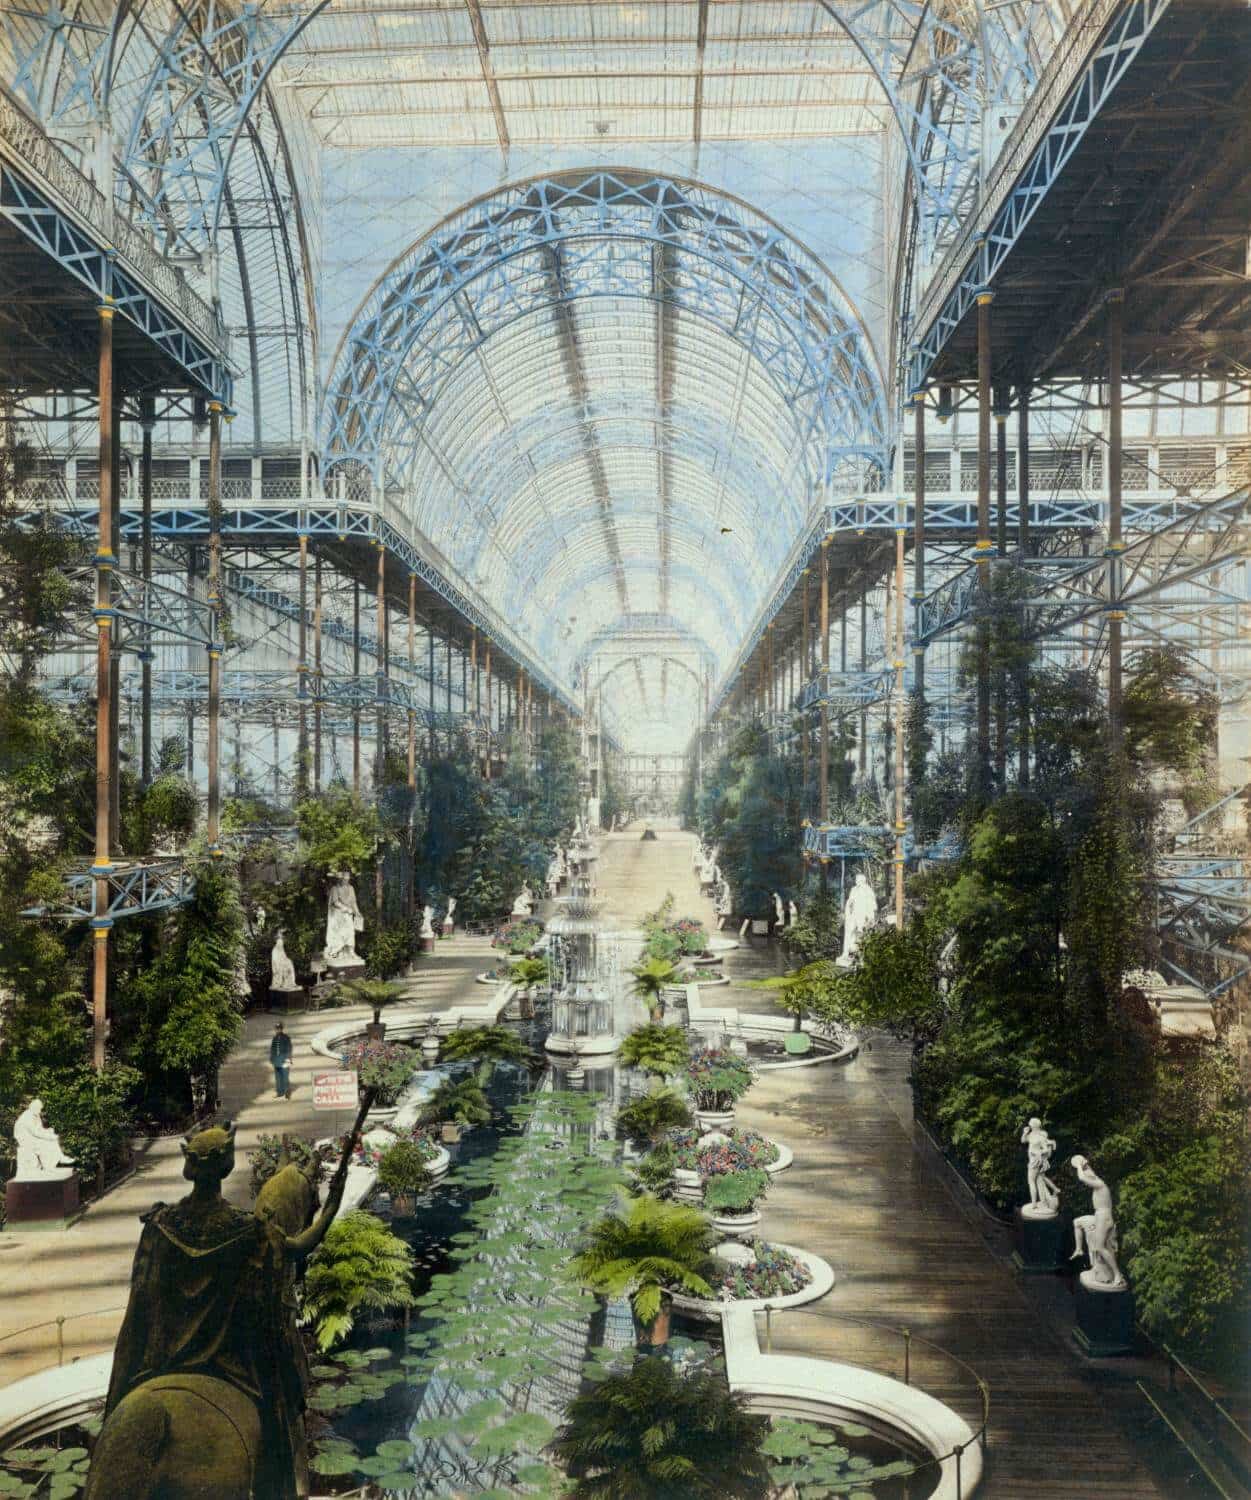 The interior of the Crystal Palace circa 1859, eight years after the Great Exhibition. <span class="figure--credit">Source: Historic England Archive</span>